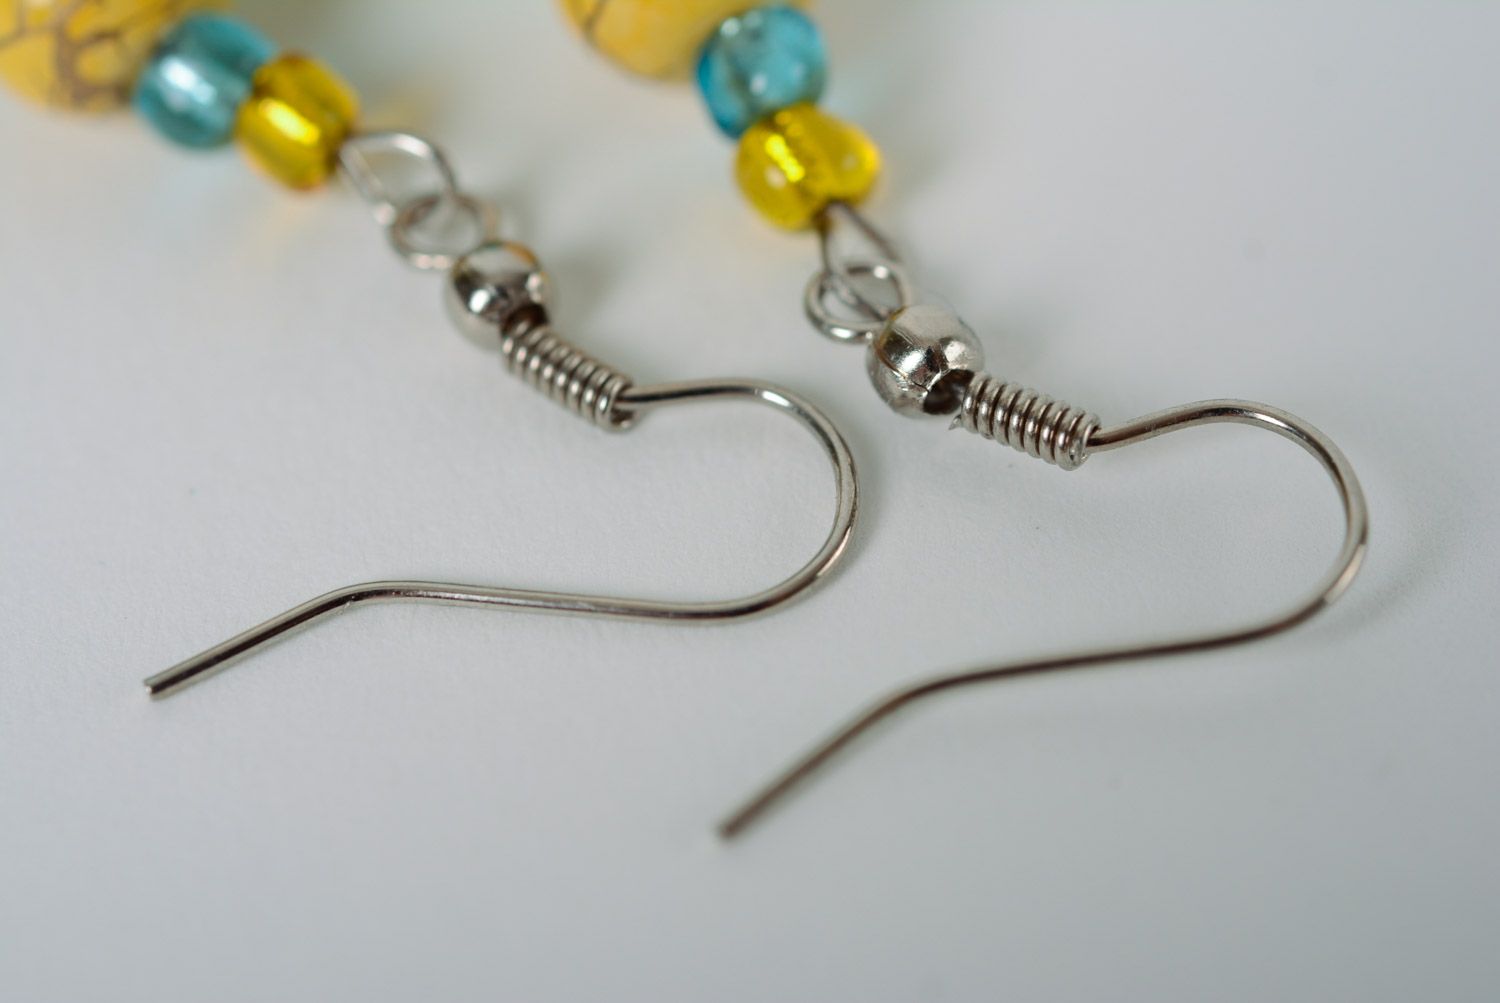 Handmade beaded earrings crocheted over with yellow and blue cotton threads photo 3